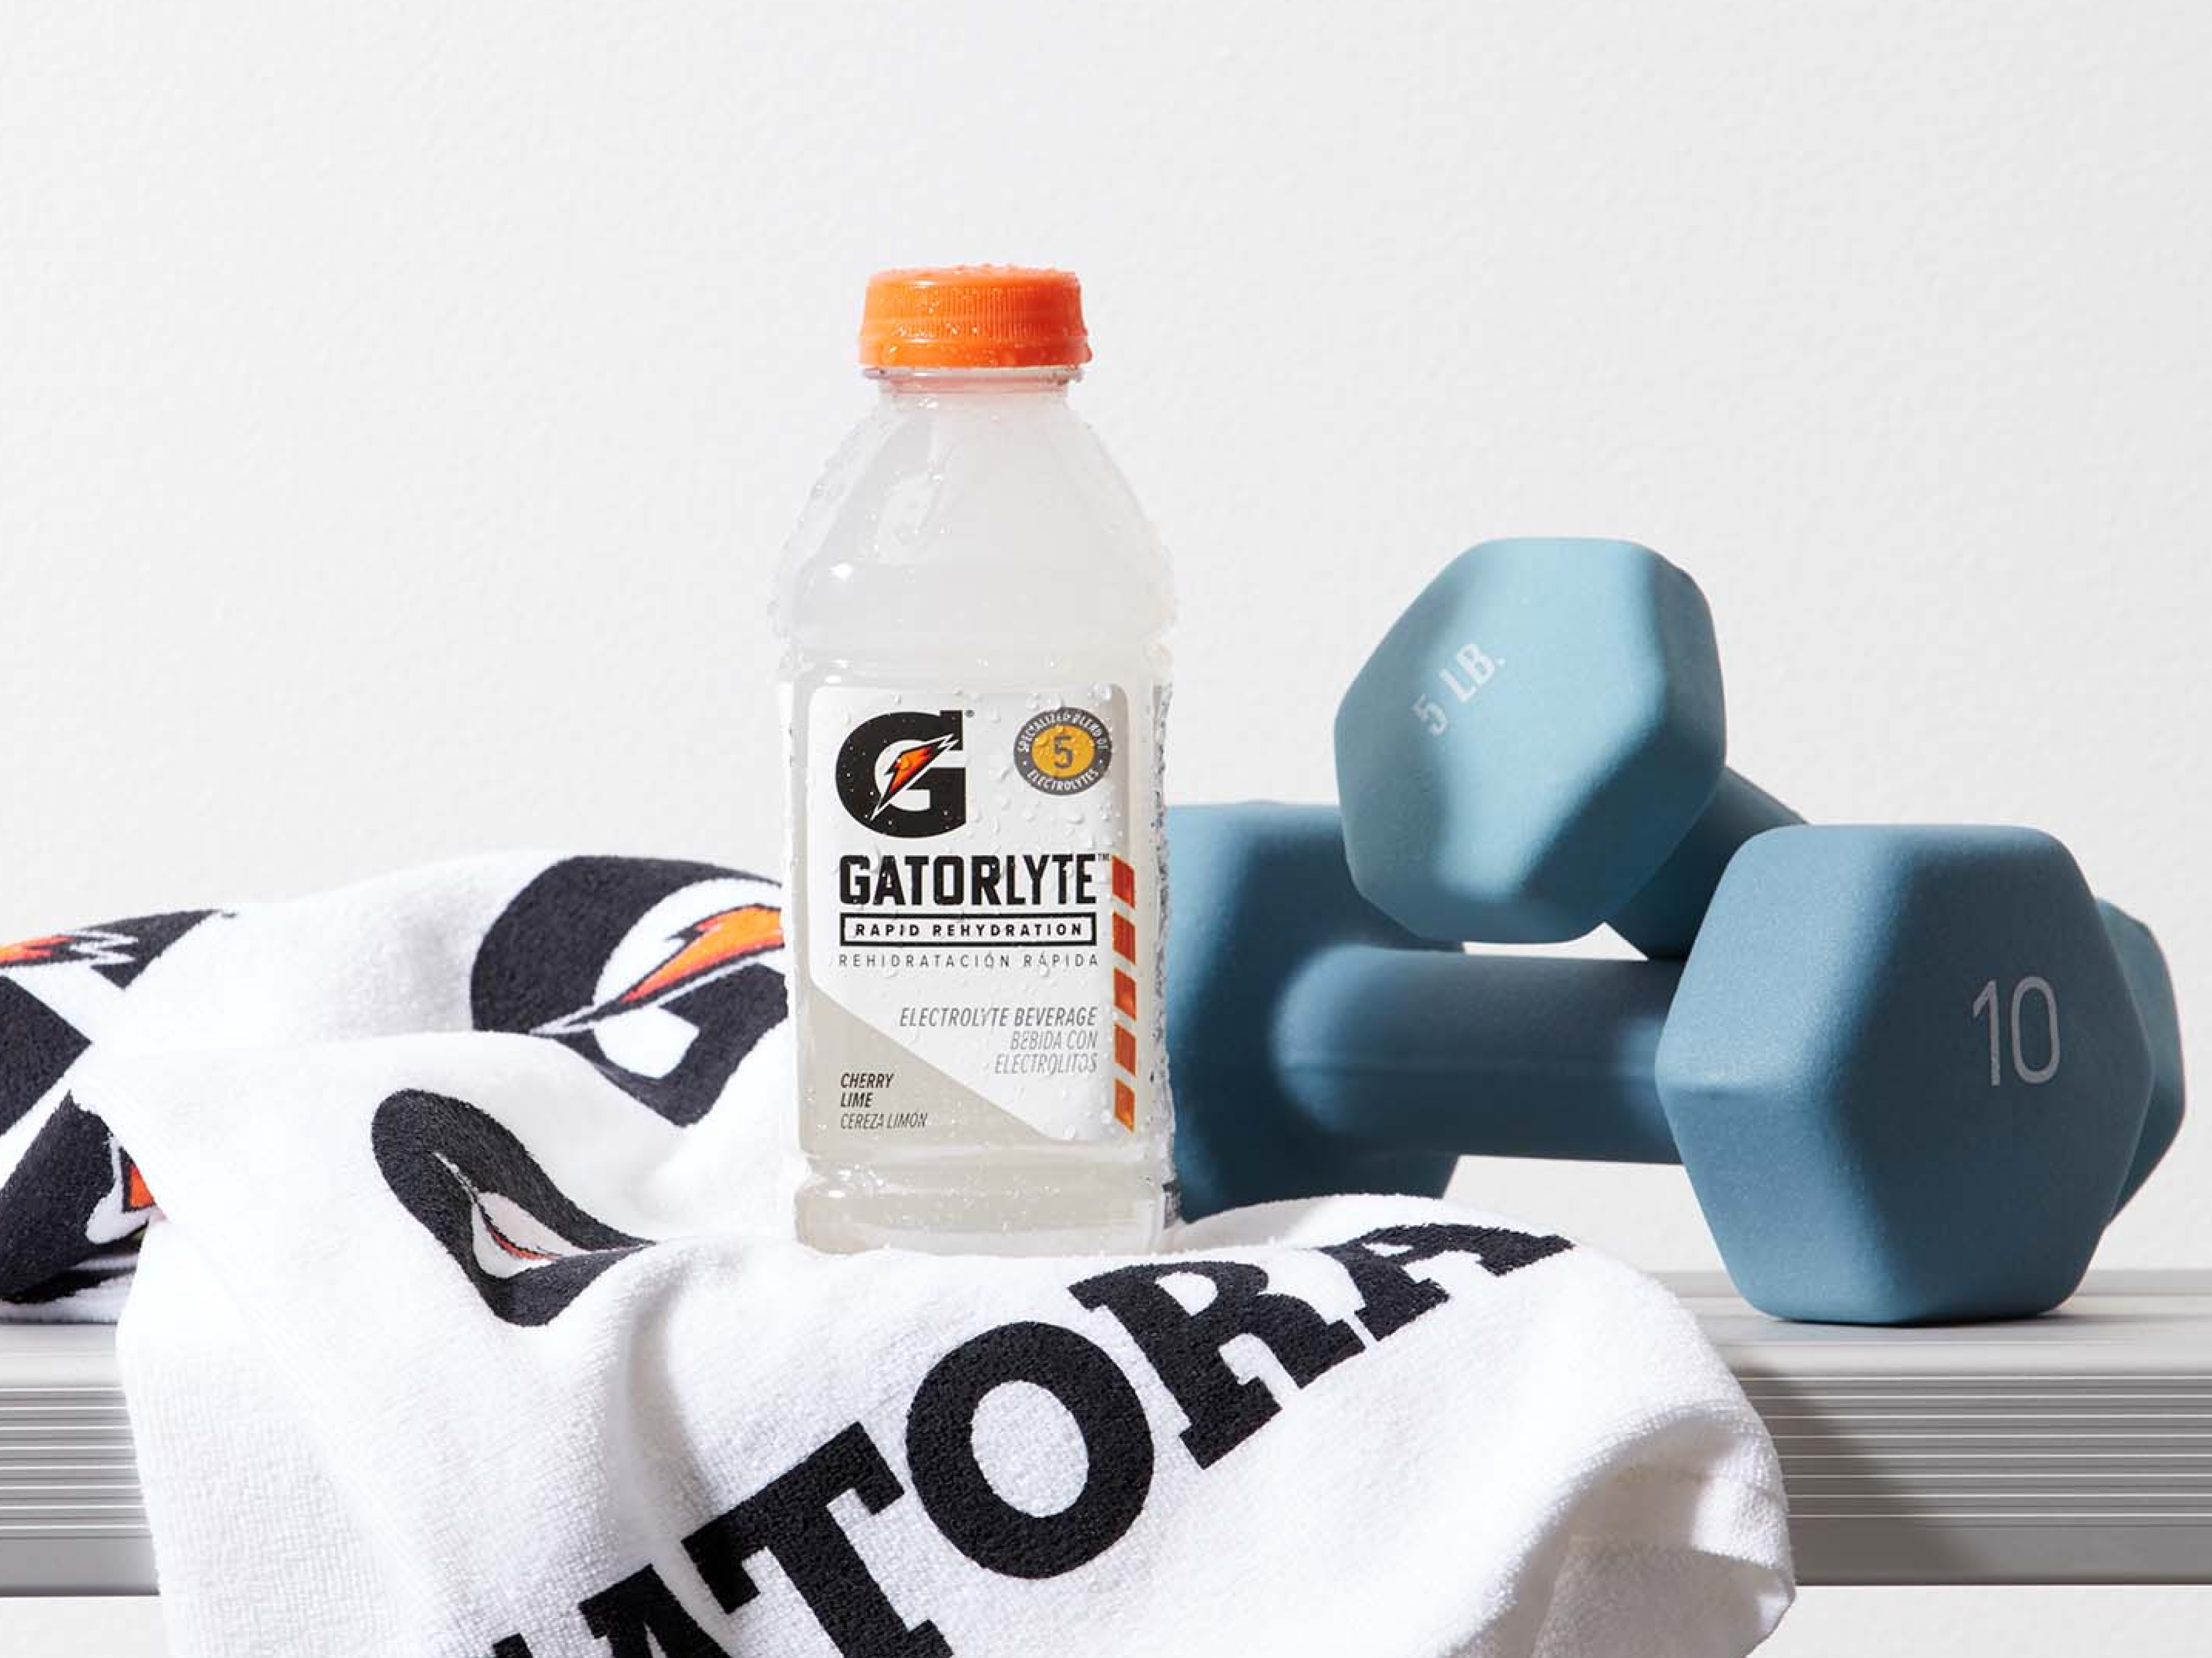 Gatorlyte cherry lime bottle with Gx towel and weights